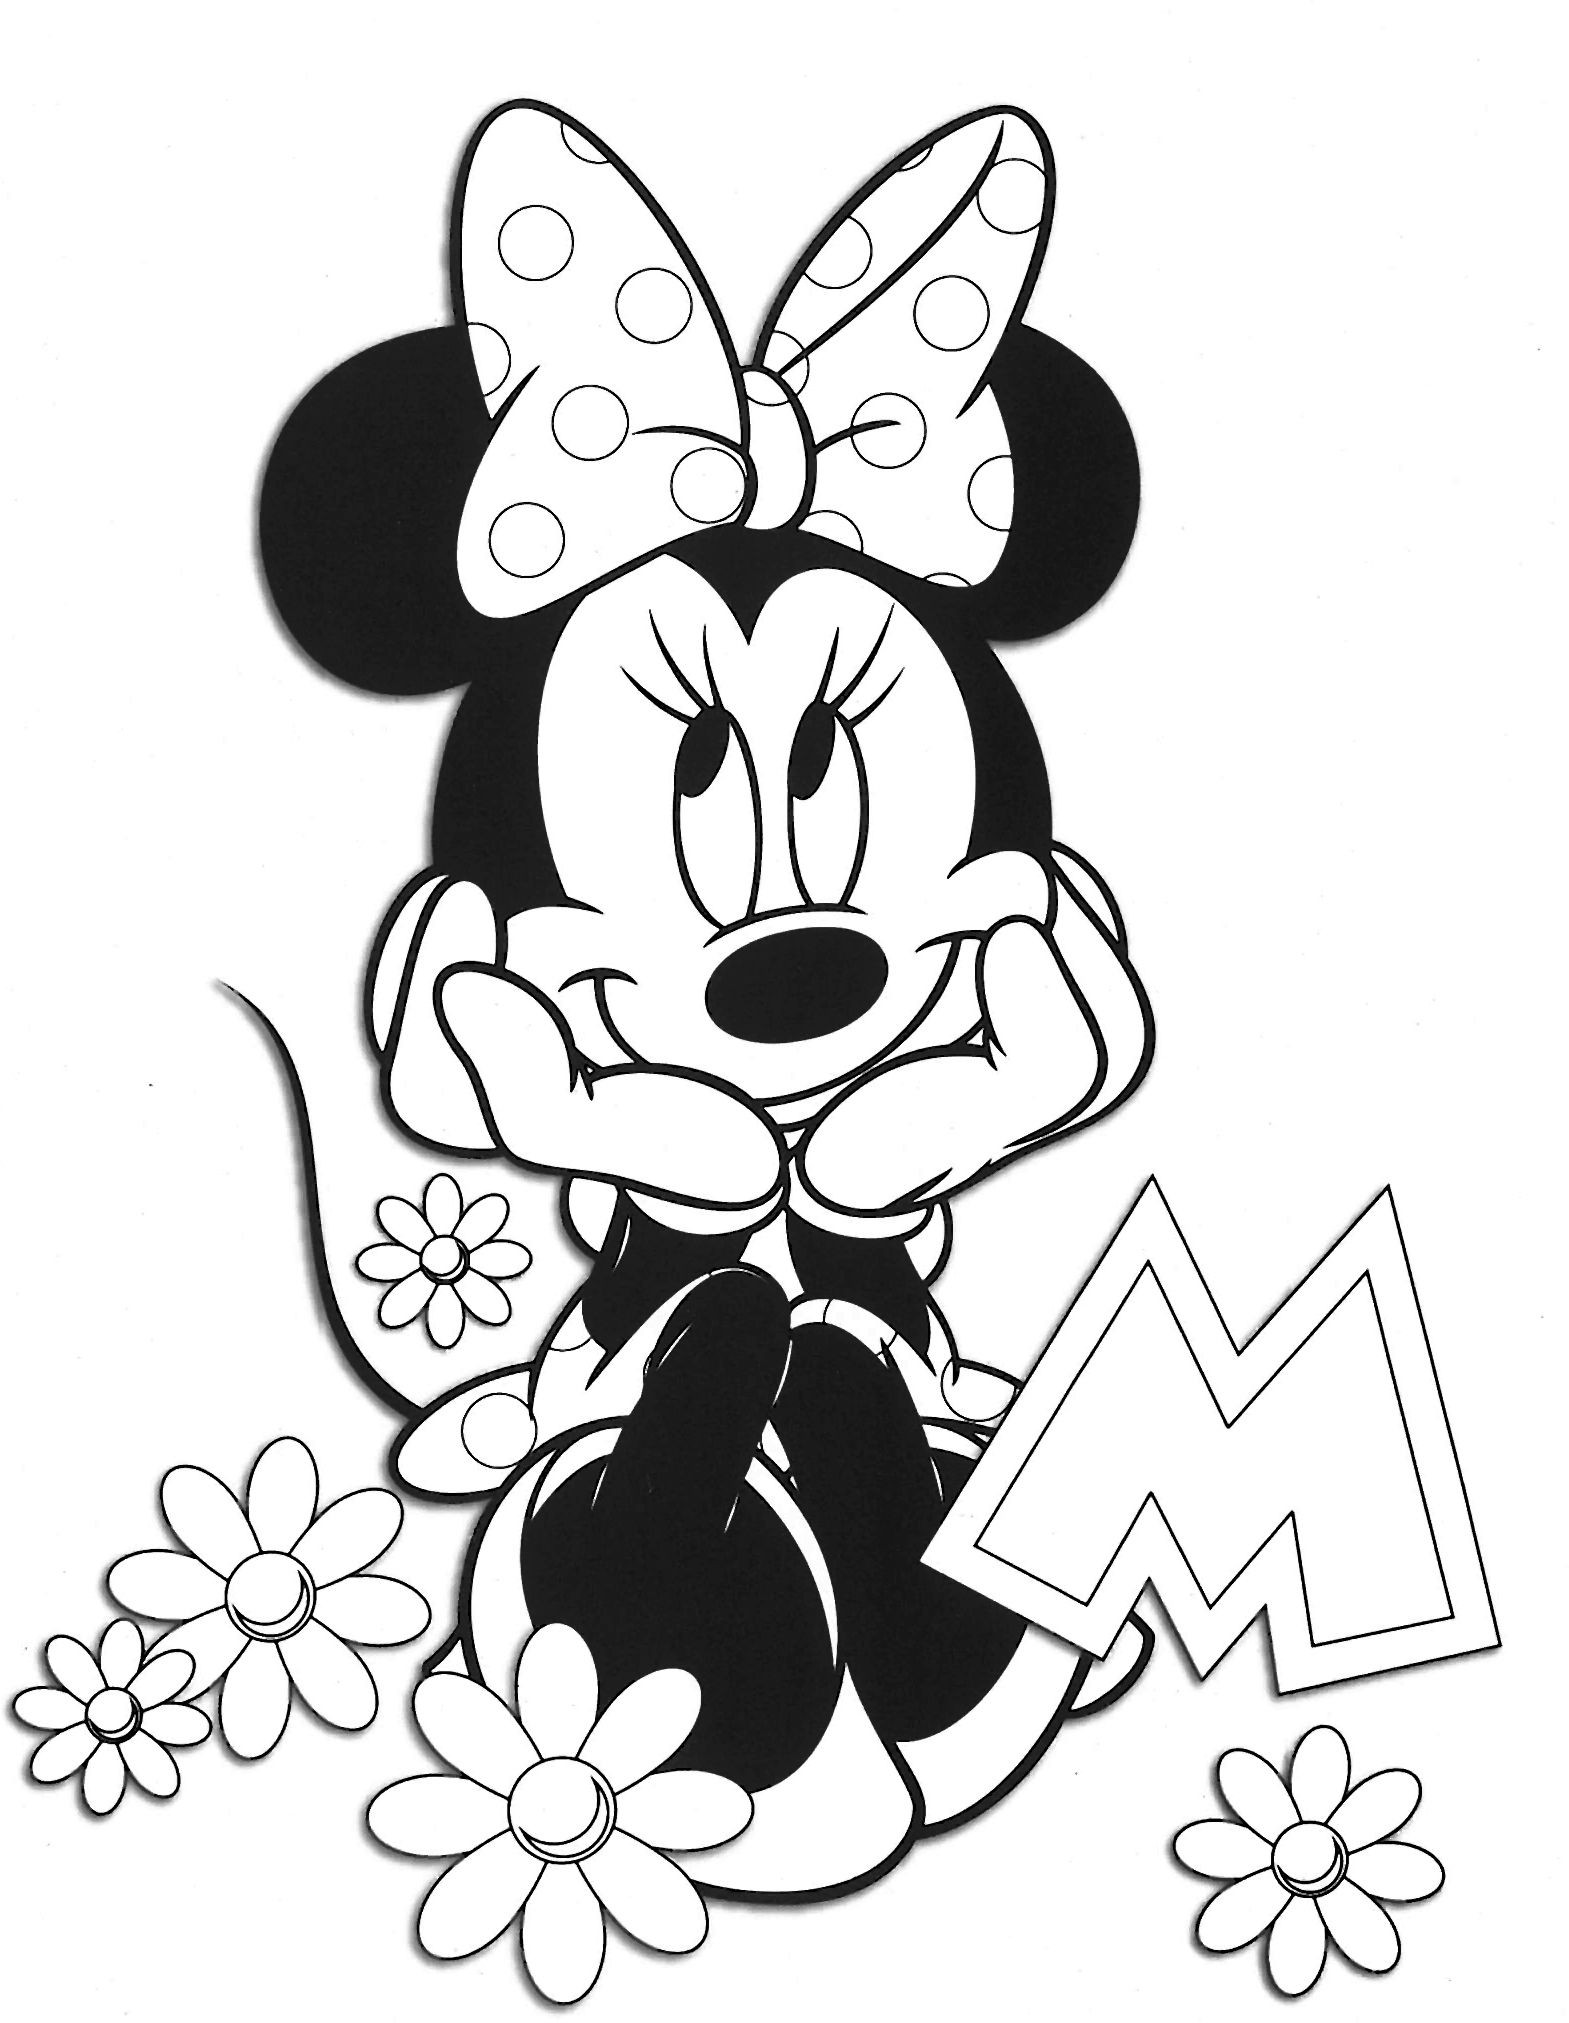 Baby Minnie Mouse Coloring Pages
 MINNIE Minnie baby Pinterest